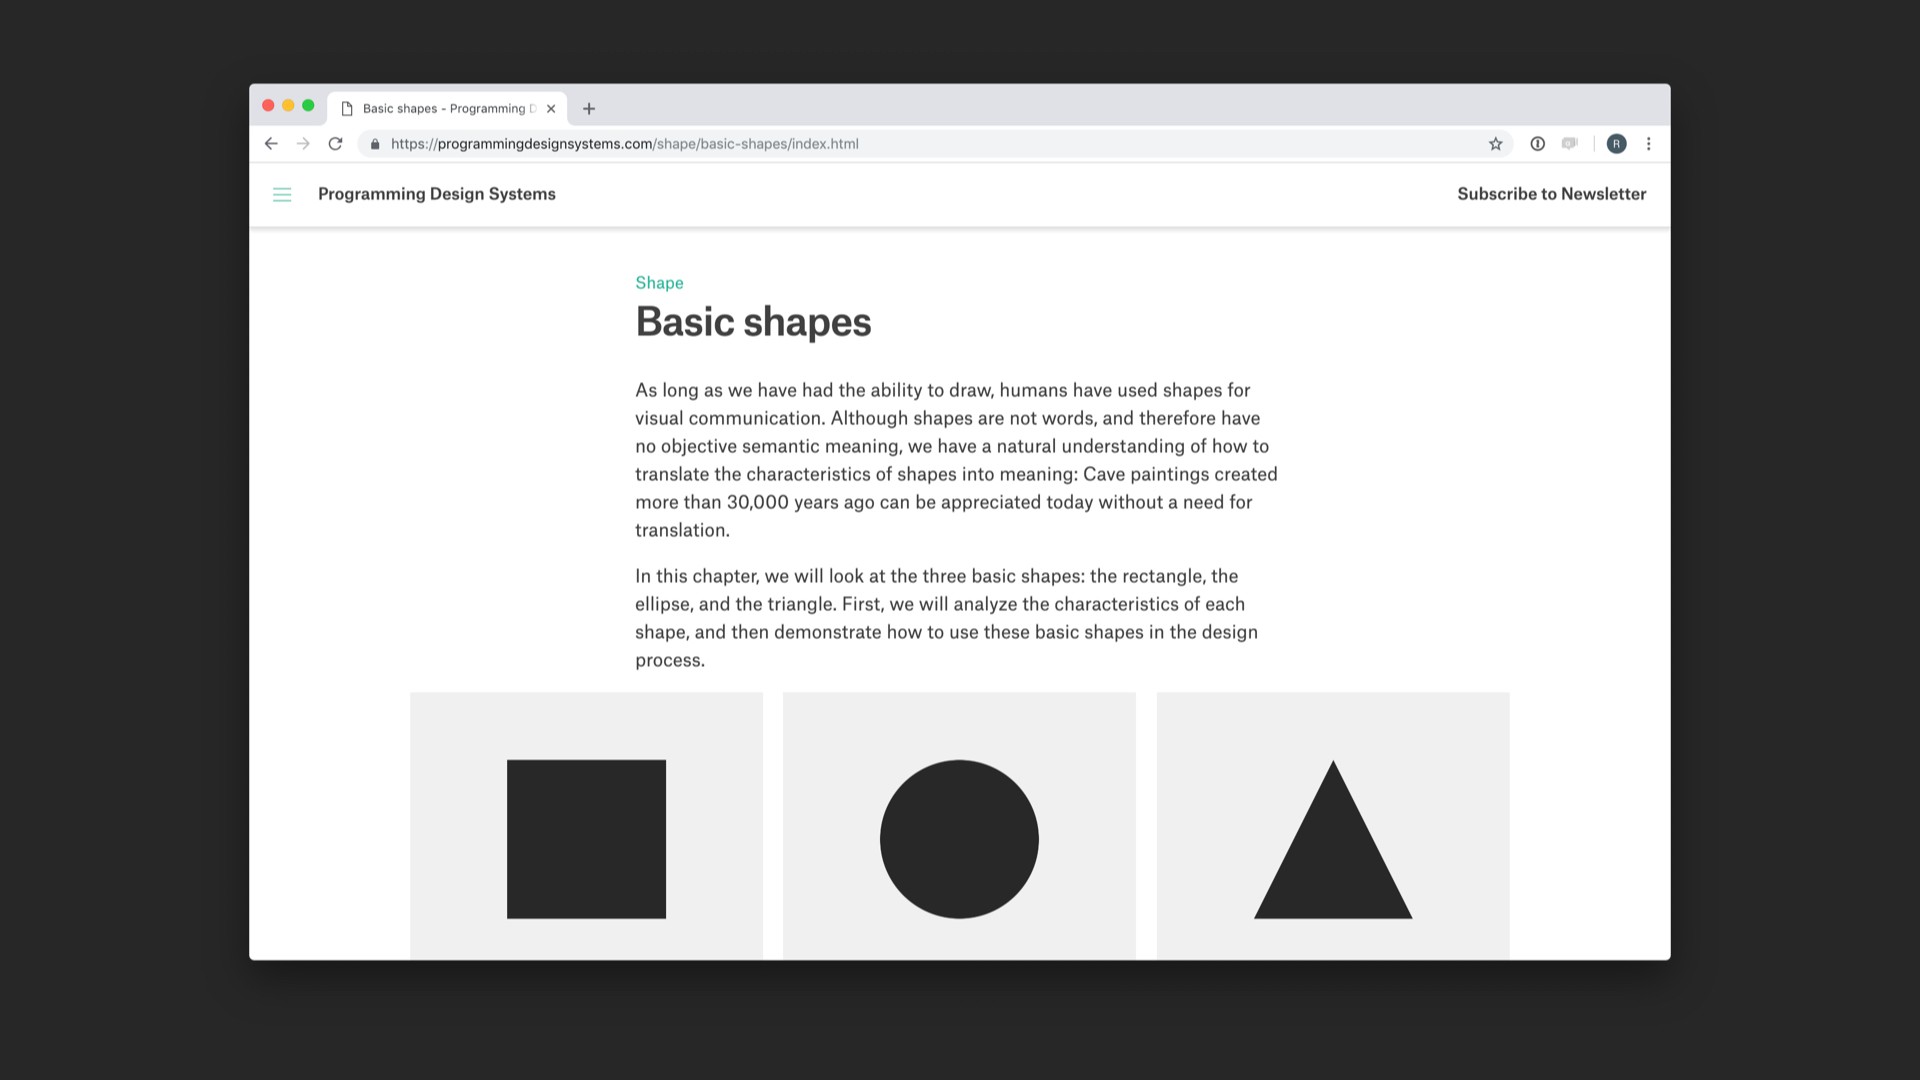 Screenshot of 'Basic shapes' chapter of referenced website.